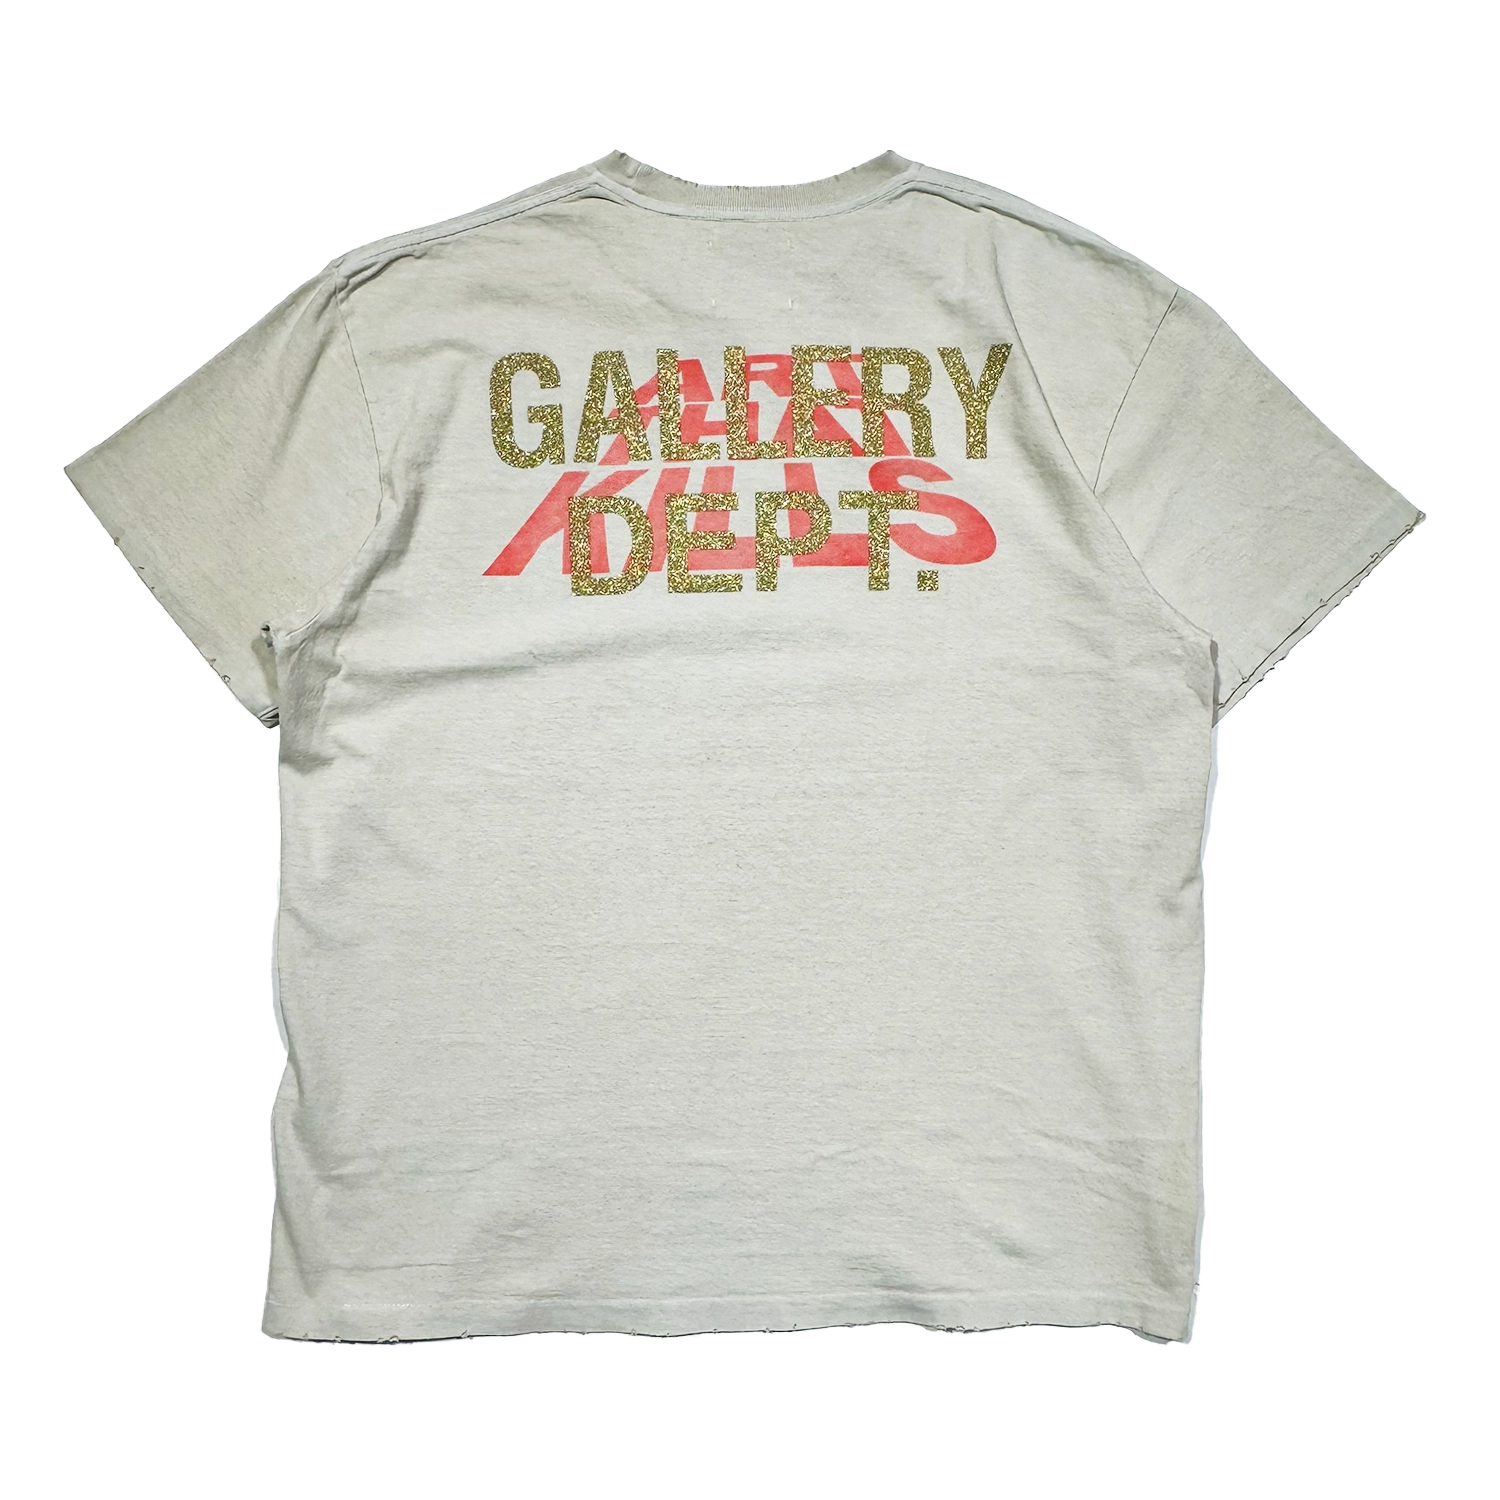 GALLERY DEPT. / FUCK YOUR REALITY TEE ANTIQUE WHITE